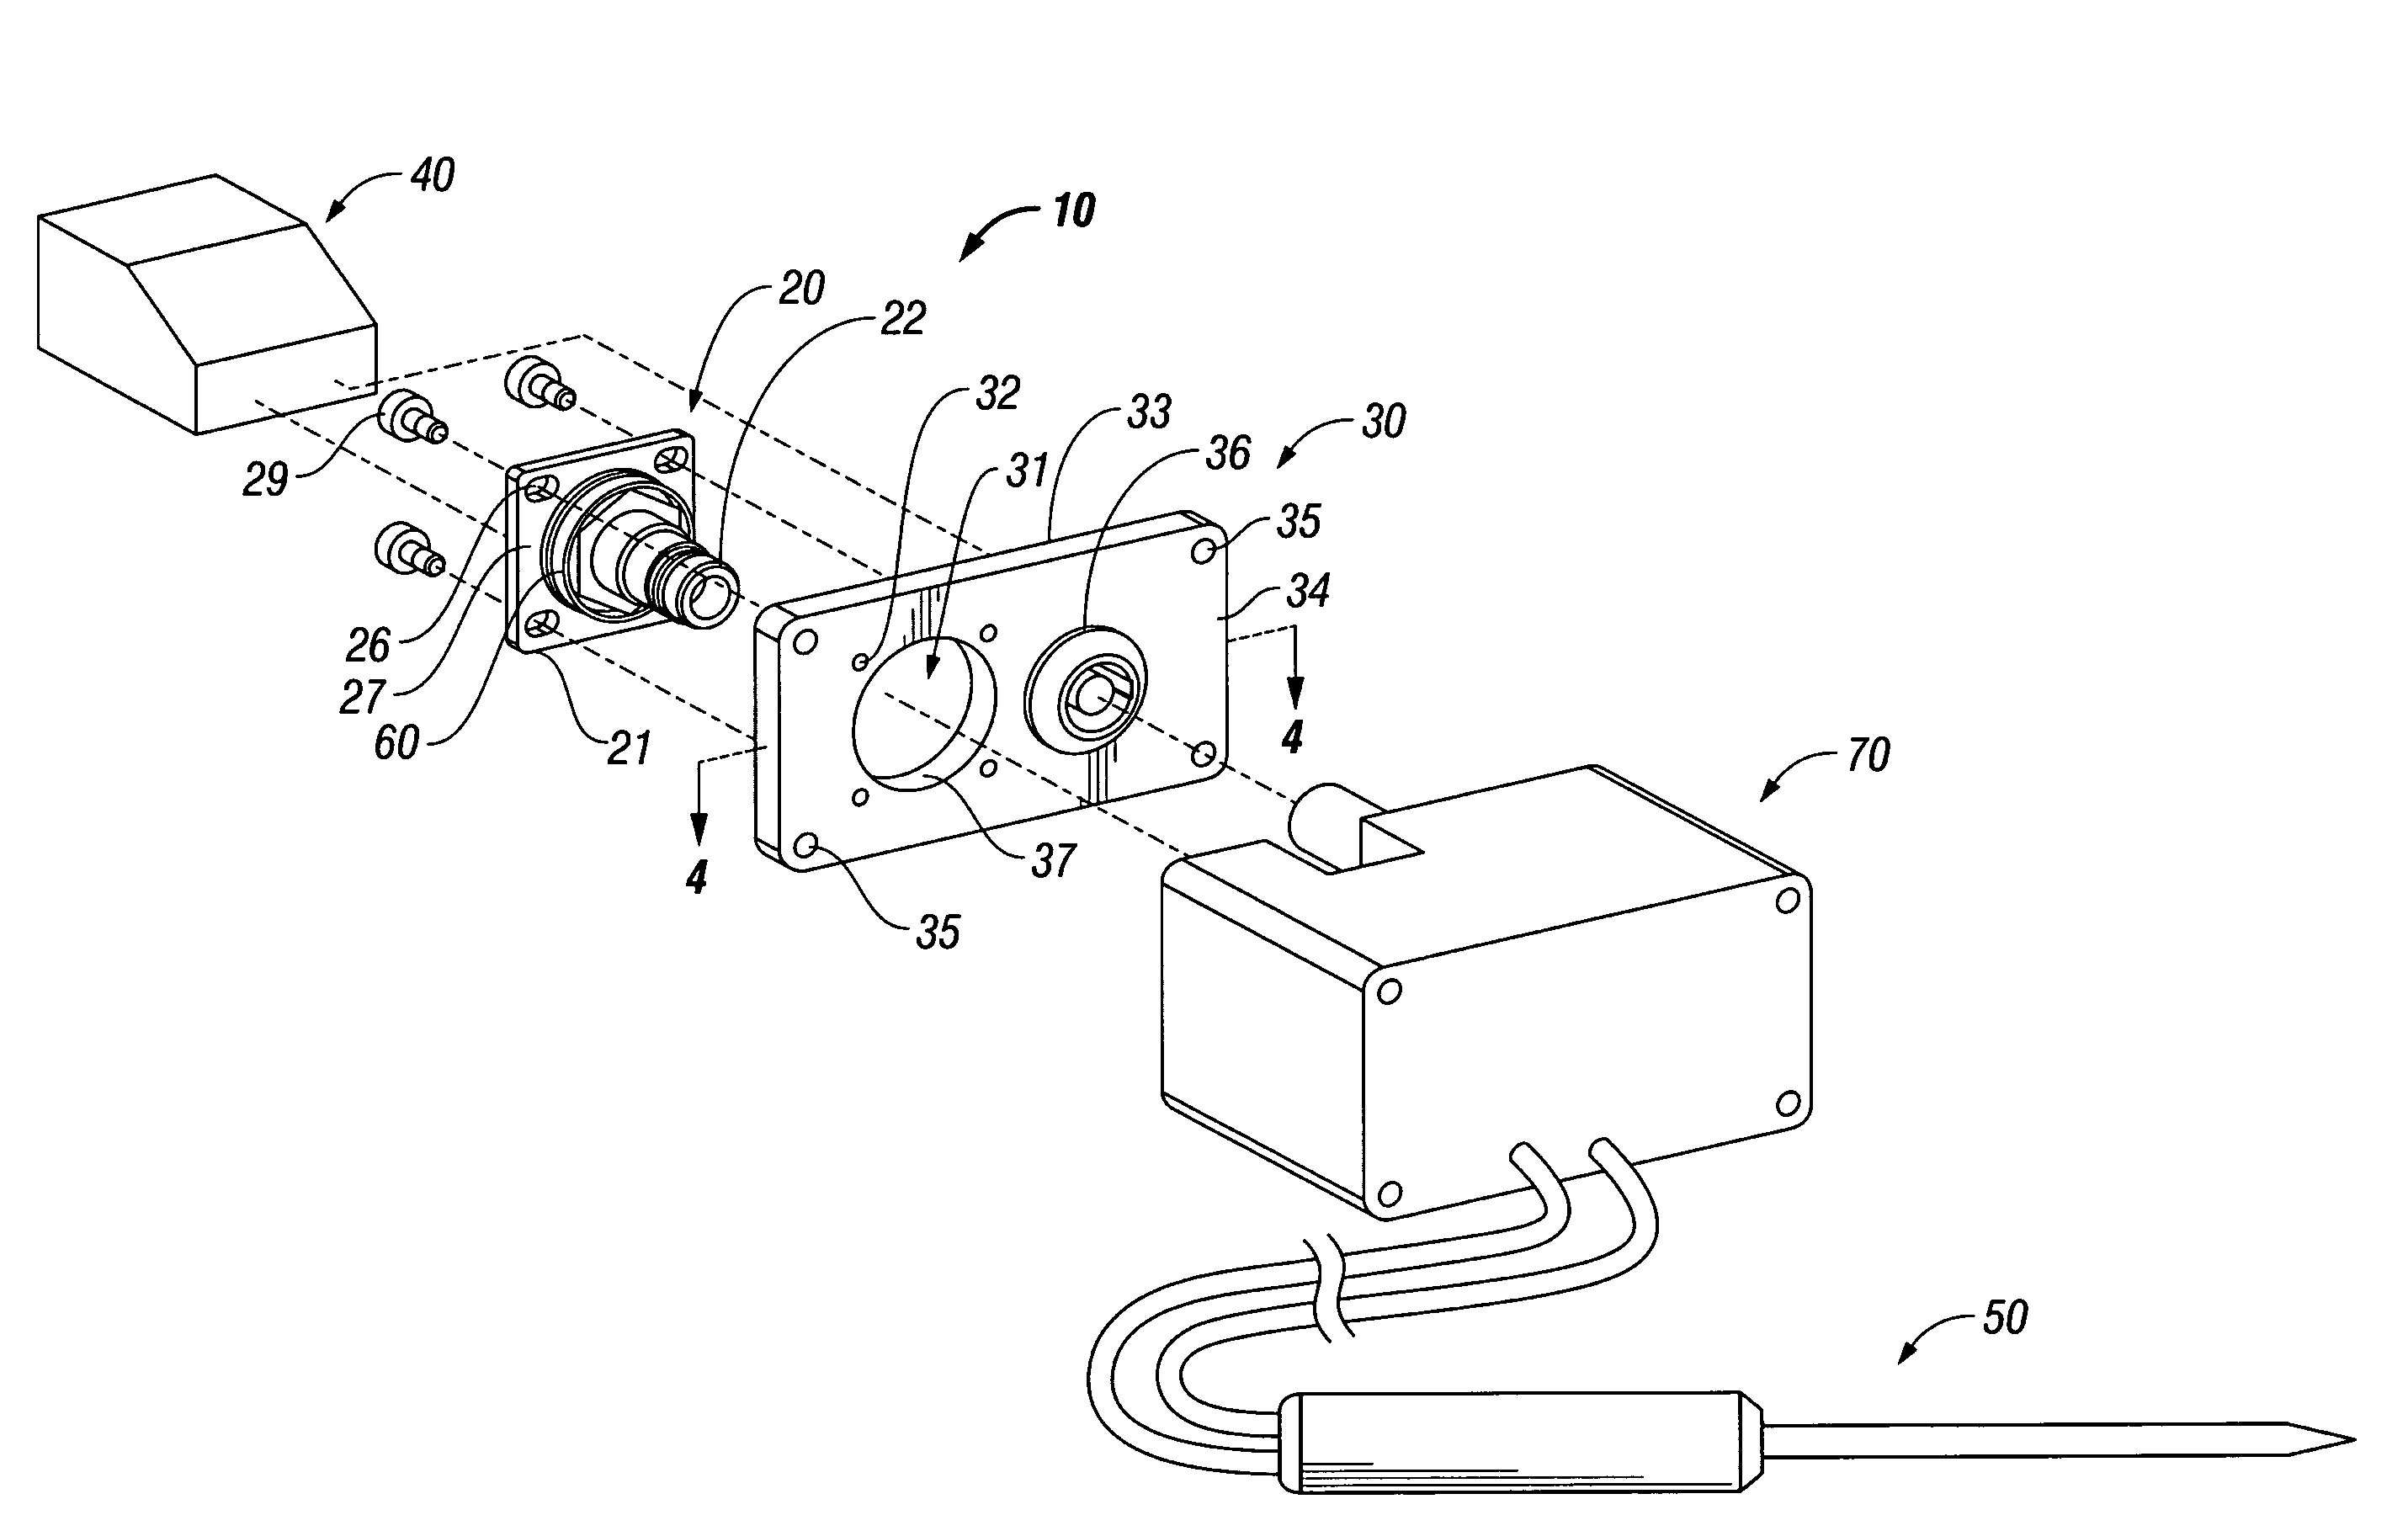 Electrical receptacle assembly